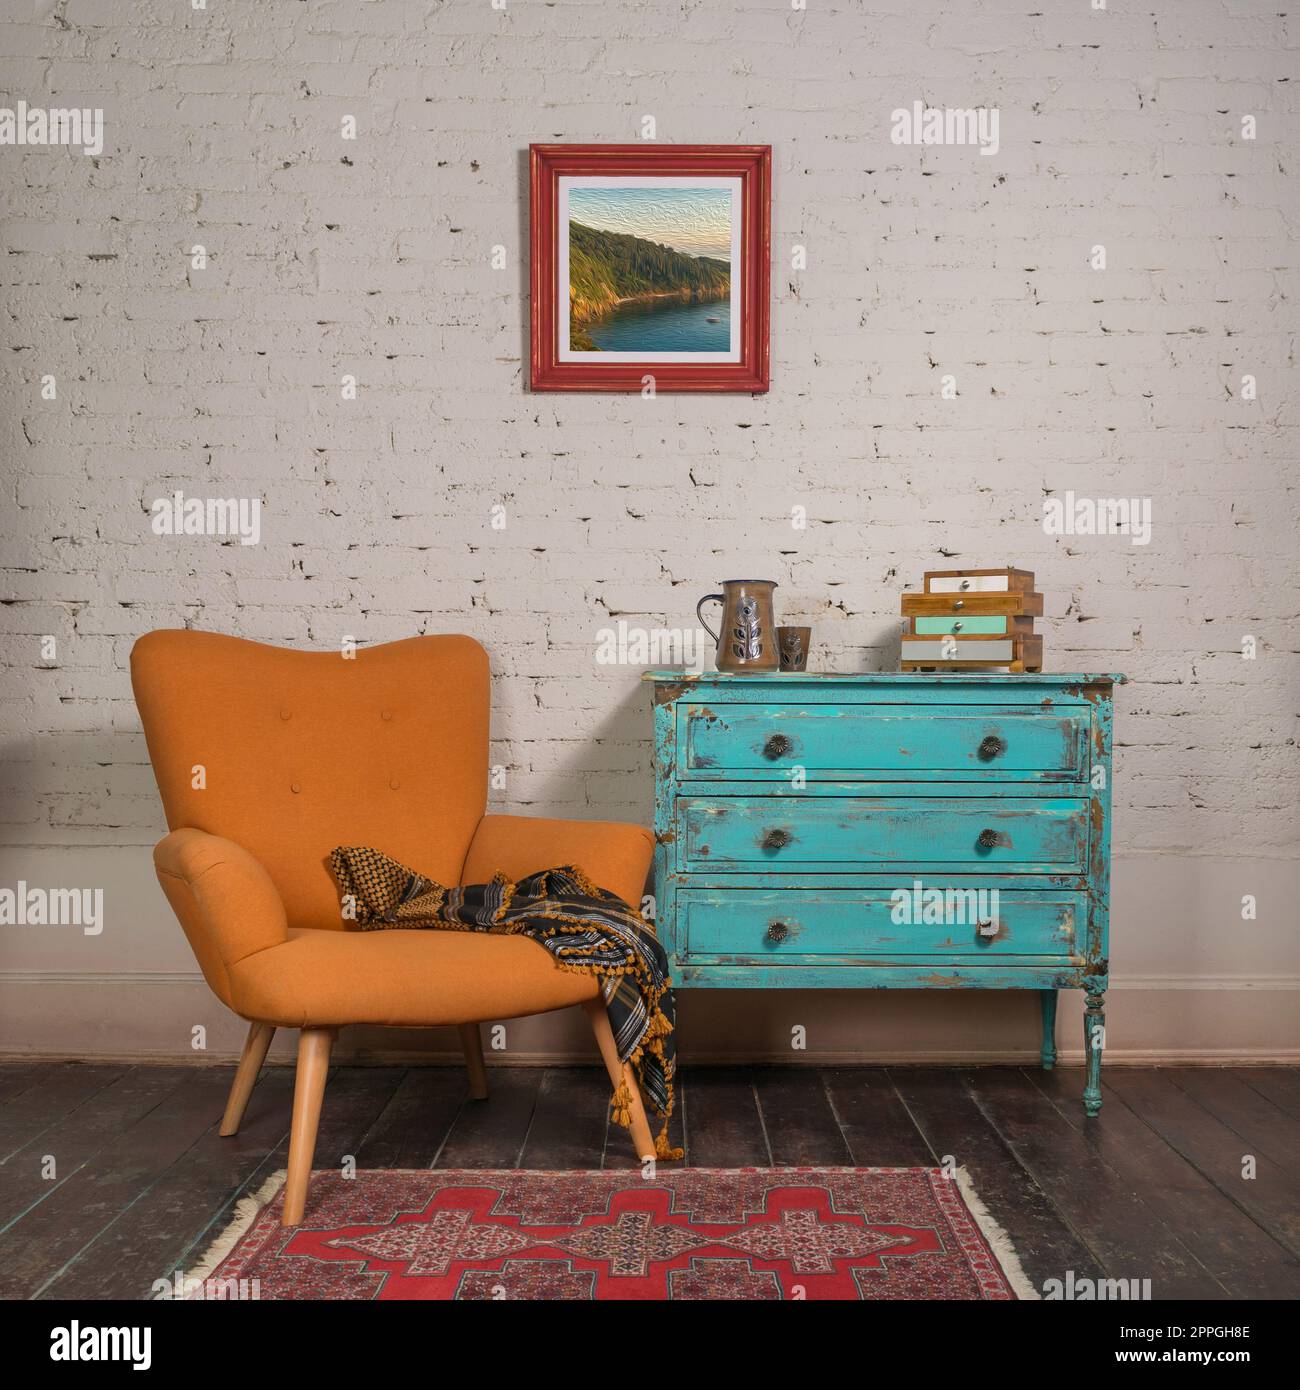 Vintage turquoise cabinet with orange stylish armchair in room interior Stock Photo